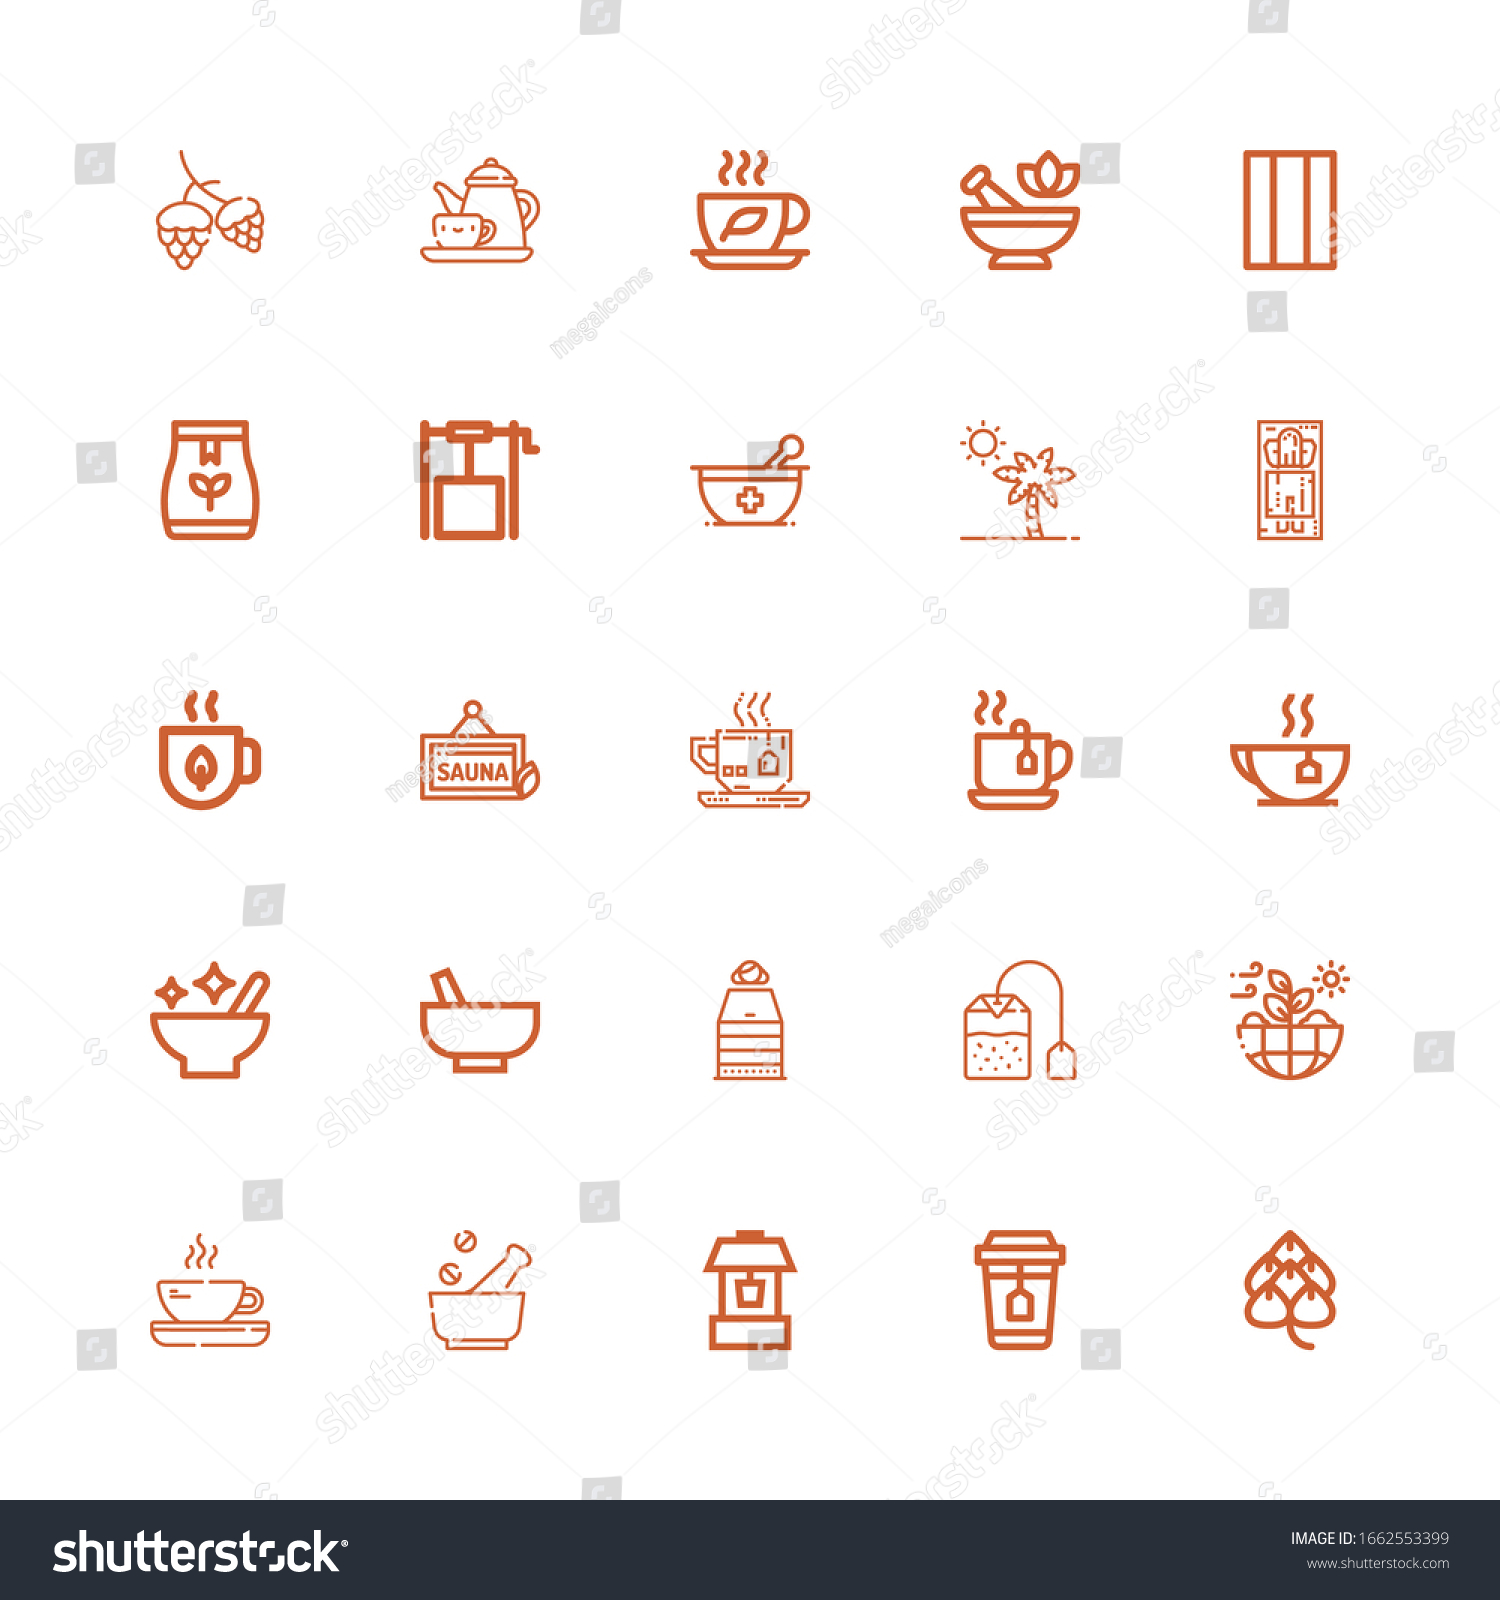 SVG of Editable 25 herbal icons for web and mobile. Set of herbal included icons line Hop, Tea, Well, Mortar, Nature, Tea bag, Sauna, Massage, Botanical, Chewing gum on white background svg